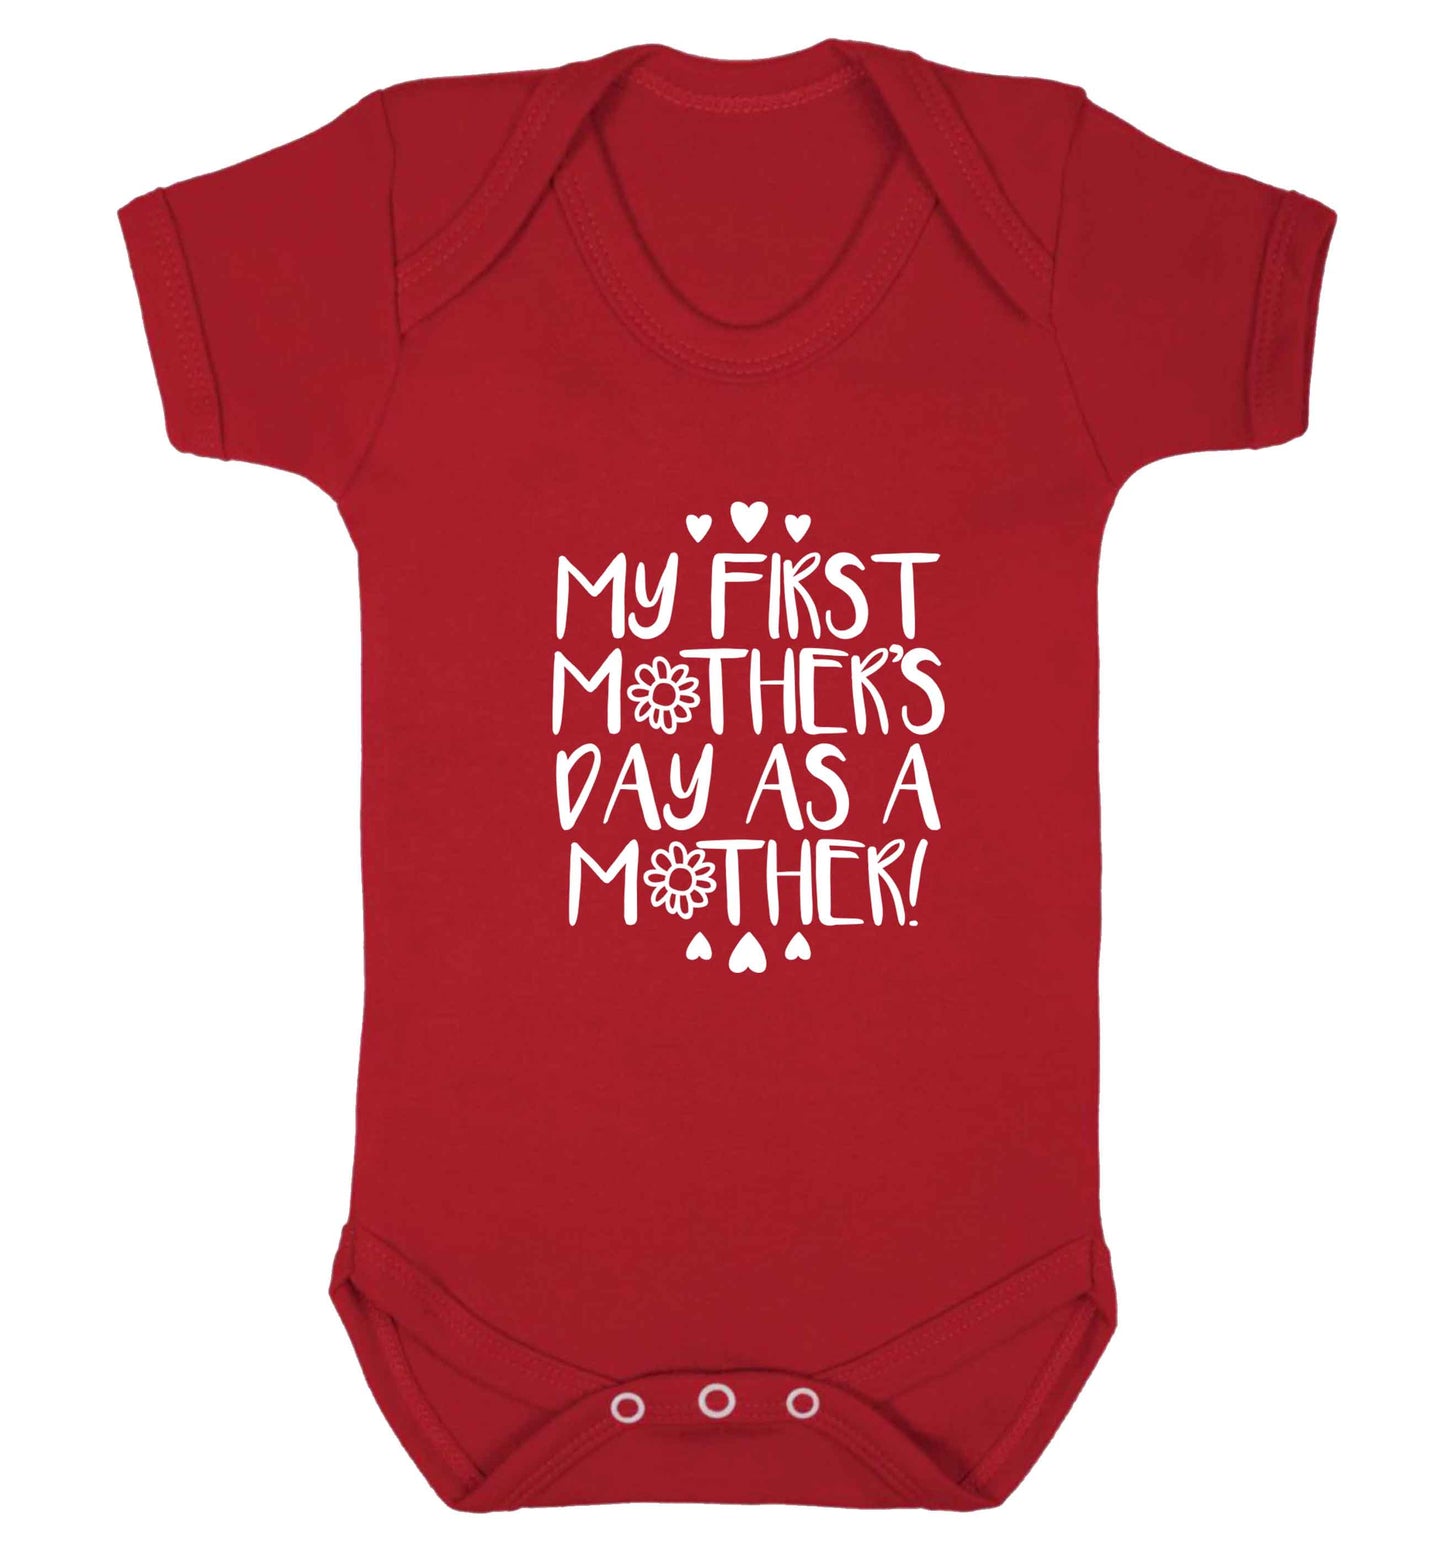 It's my first mother's day as a mother baby vest red 18-24 months